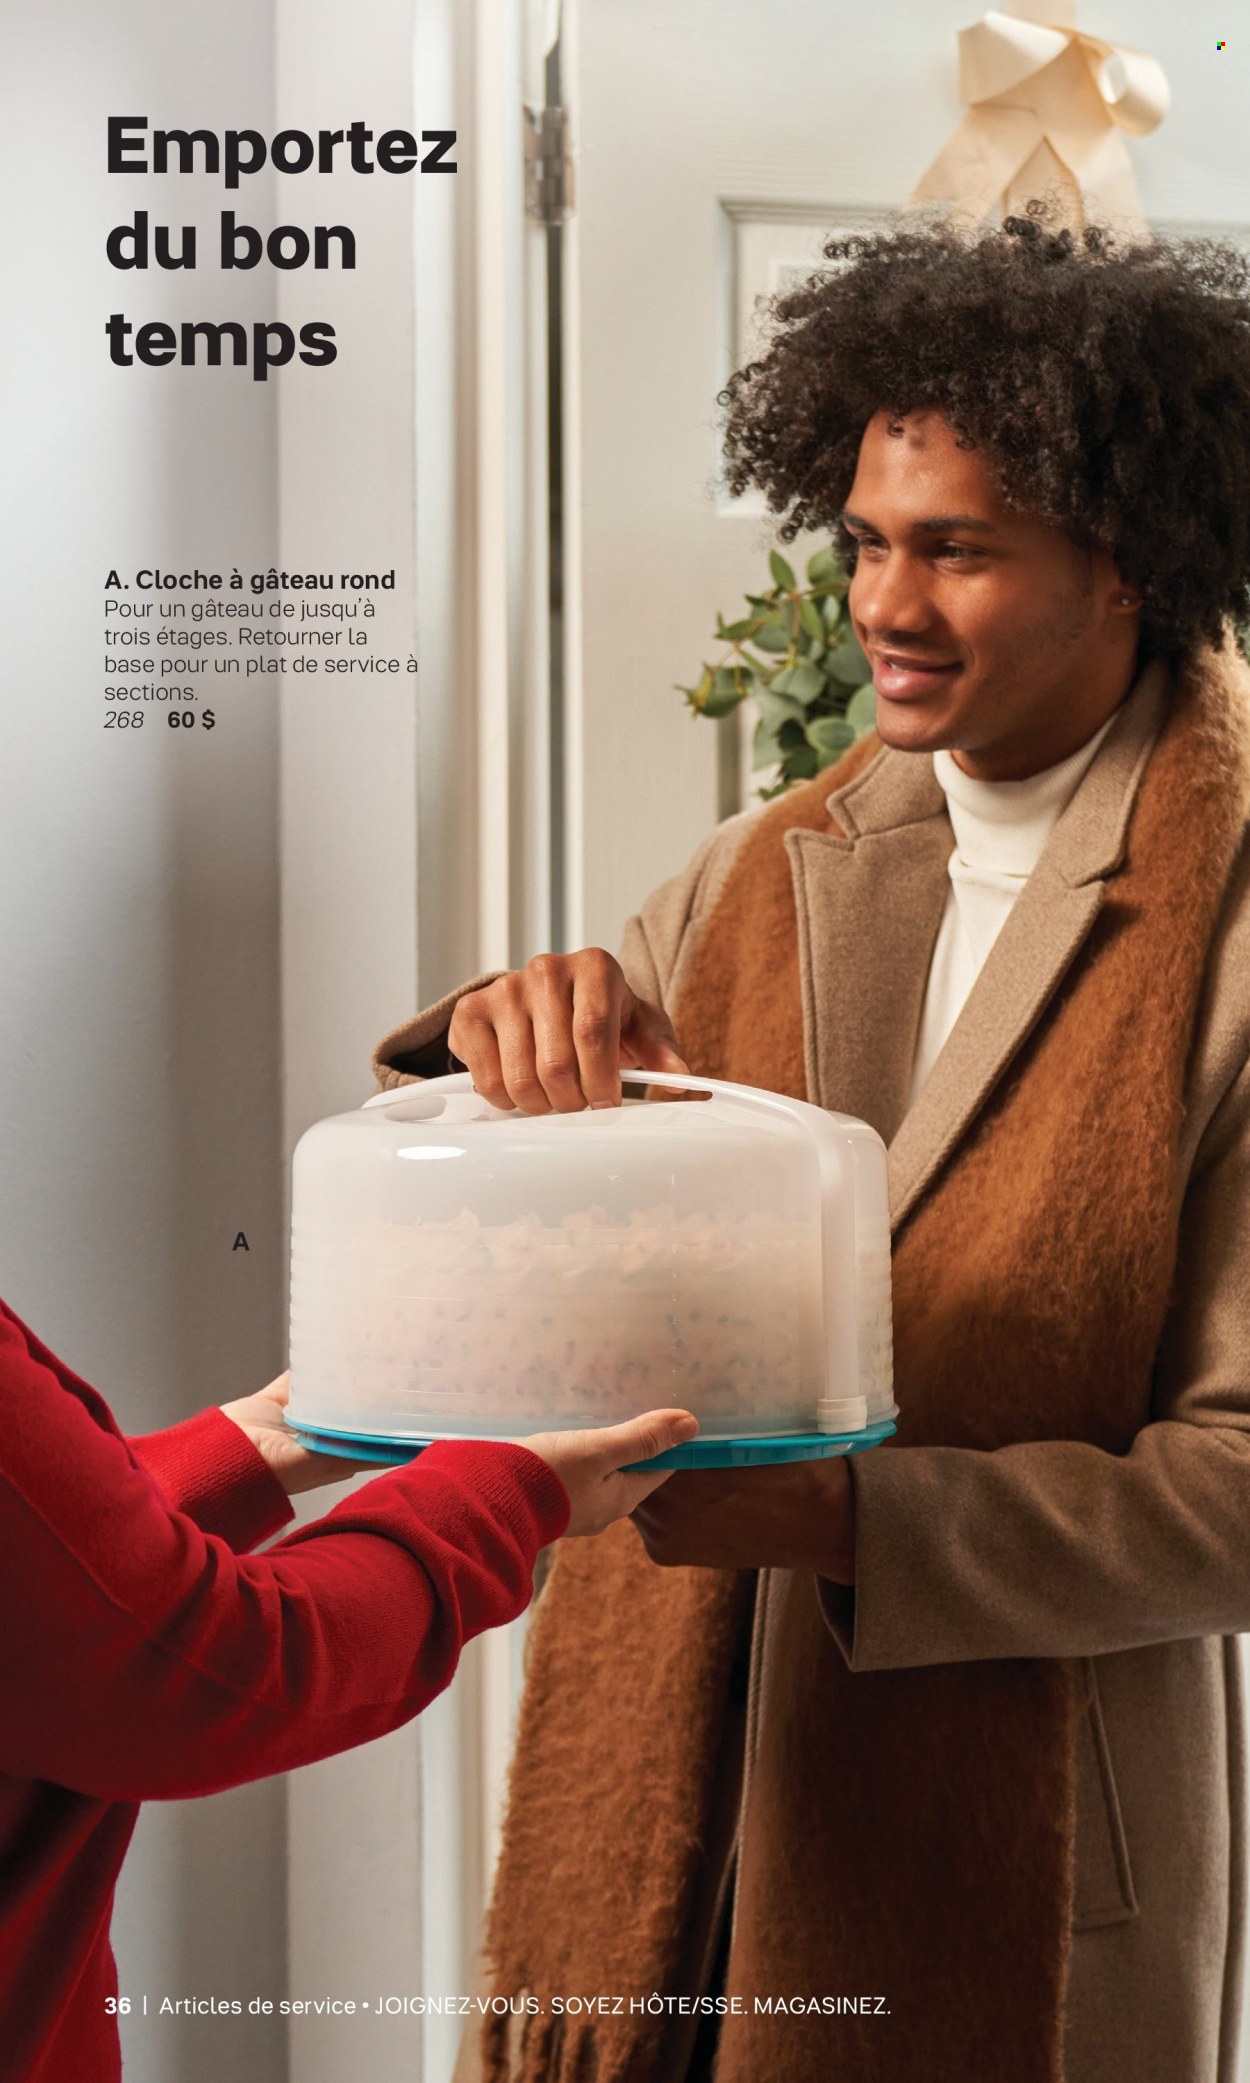 Tupperware flyer . Page 36.